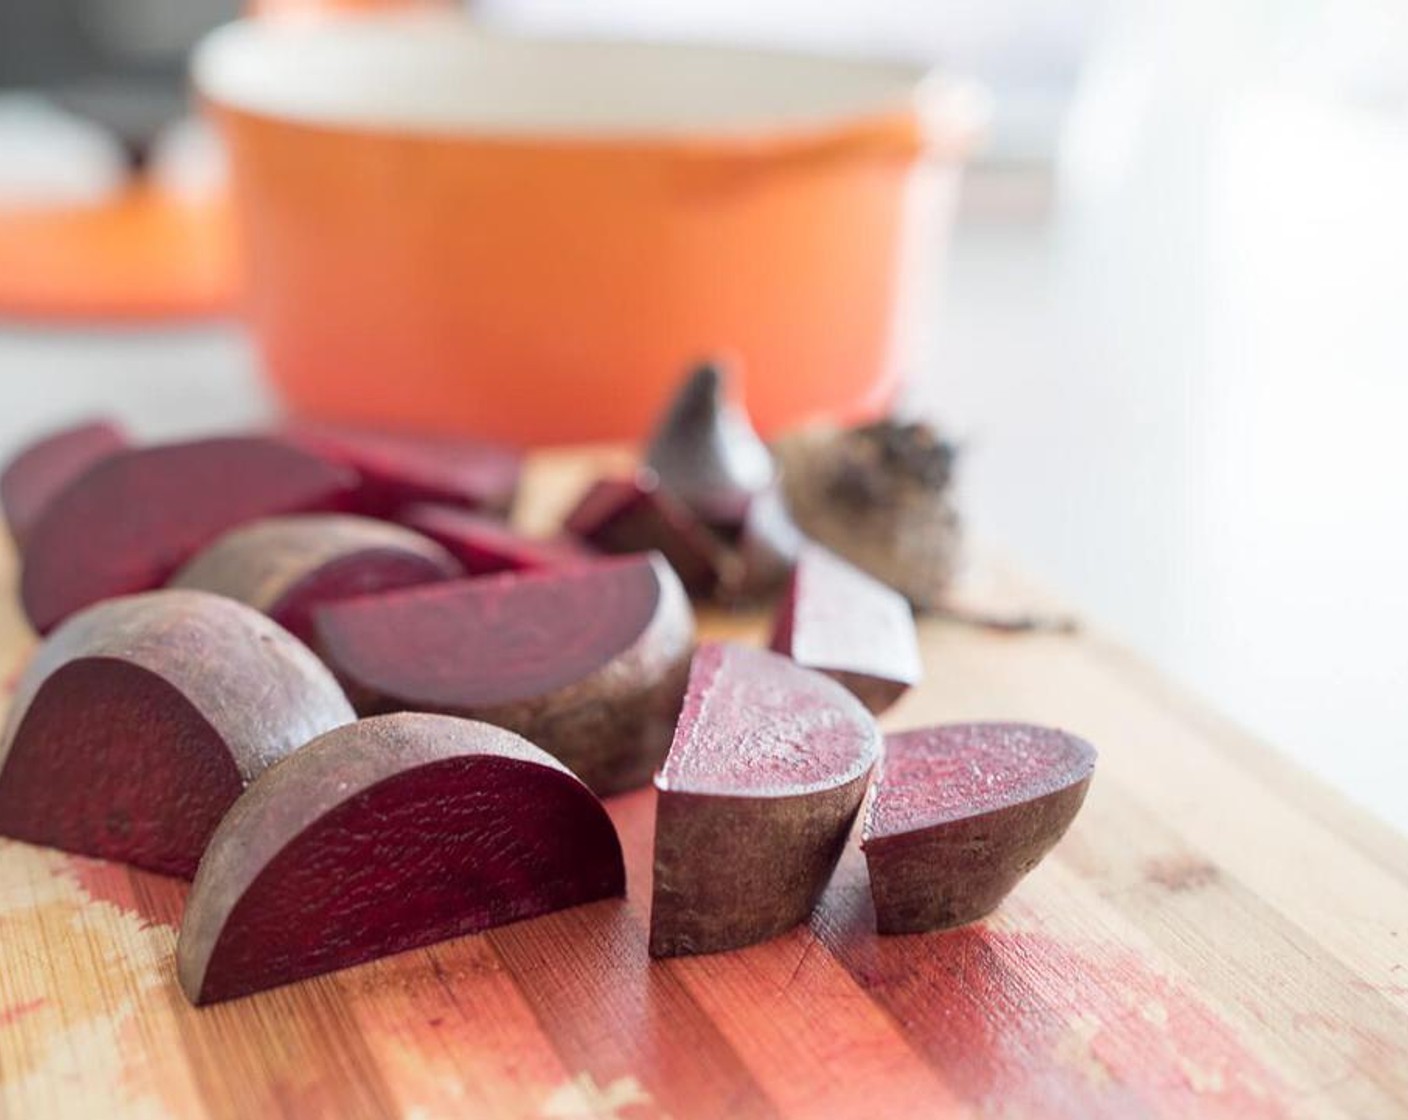 step 1 To make the pureed beets, cut Beets (2) into chunks and roast for 45 minutes at 350 degrees F (180 degrees C) in a dish with a lid or until fork tender.